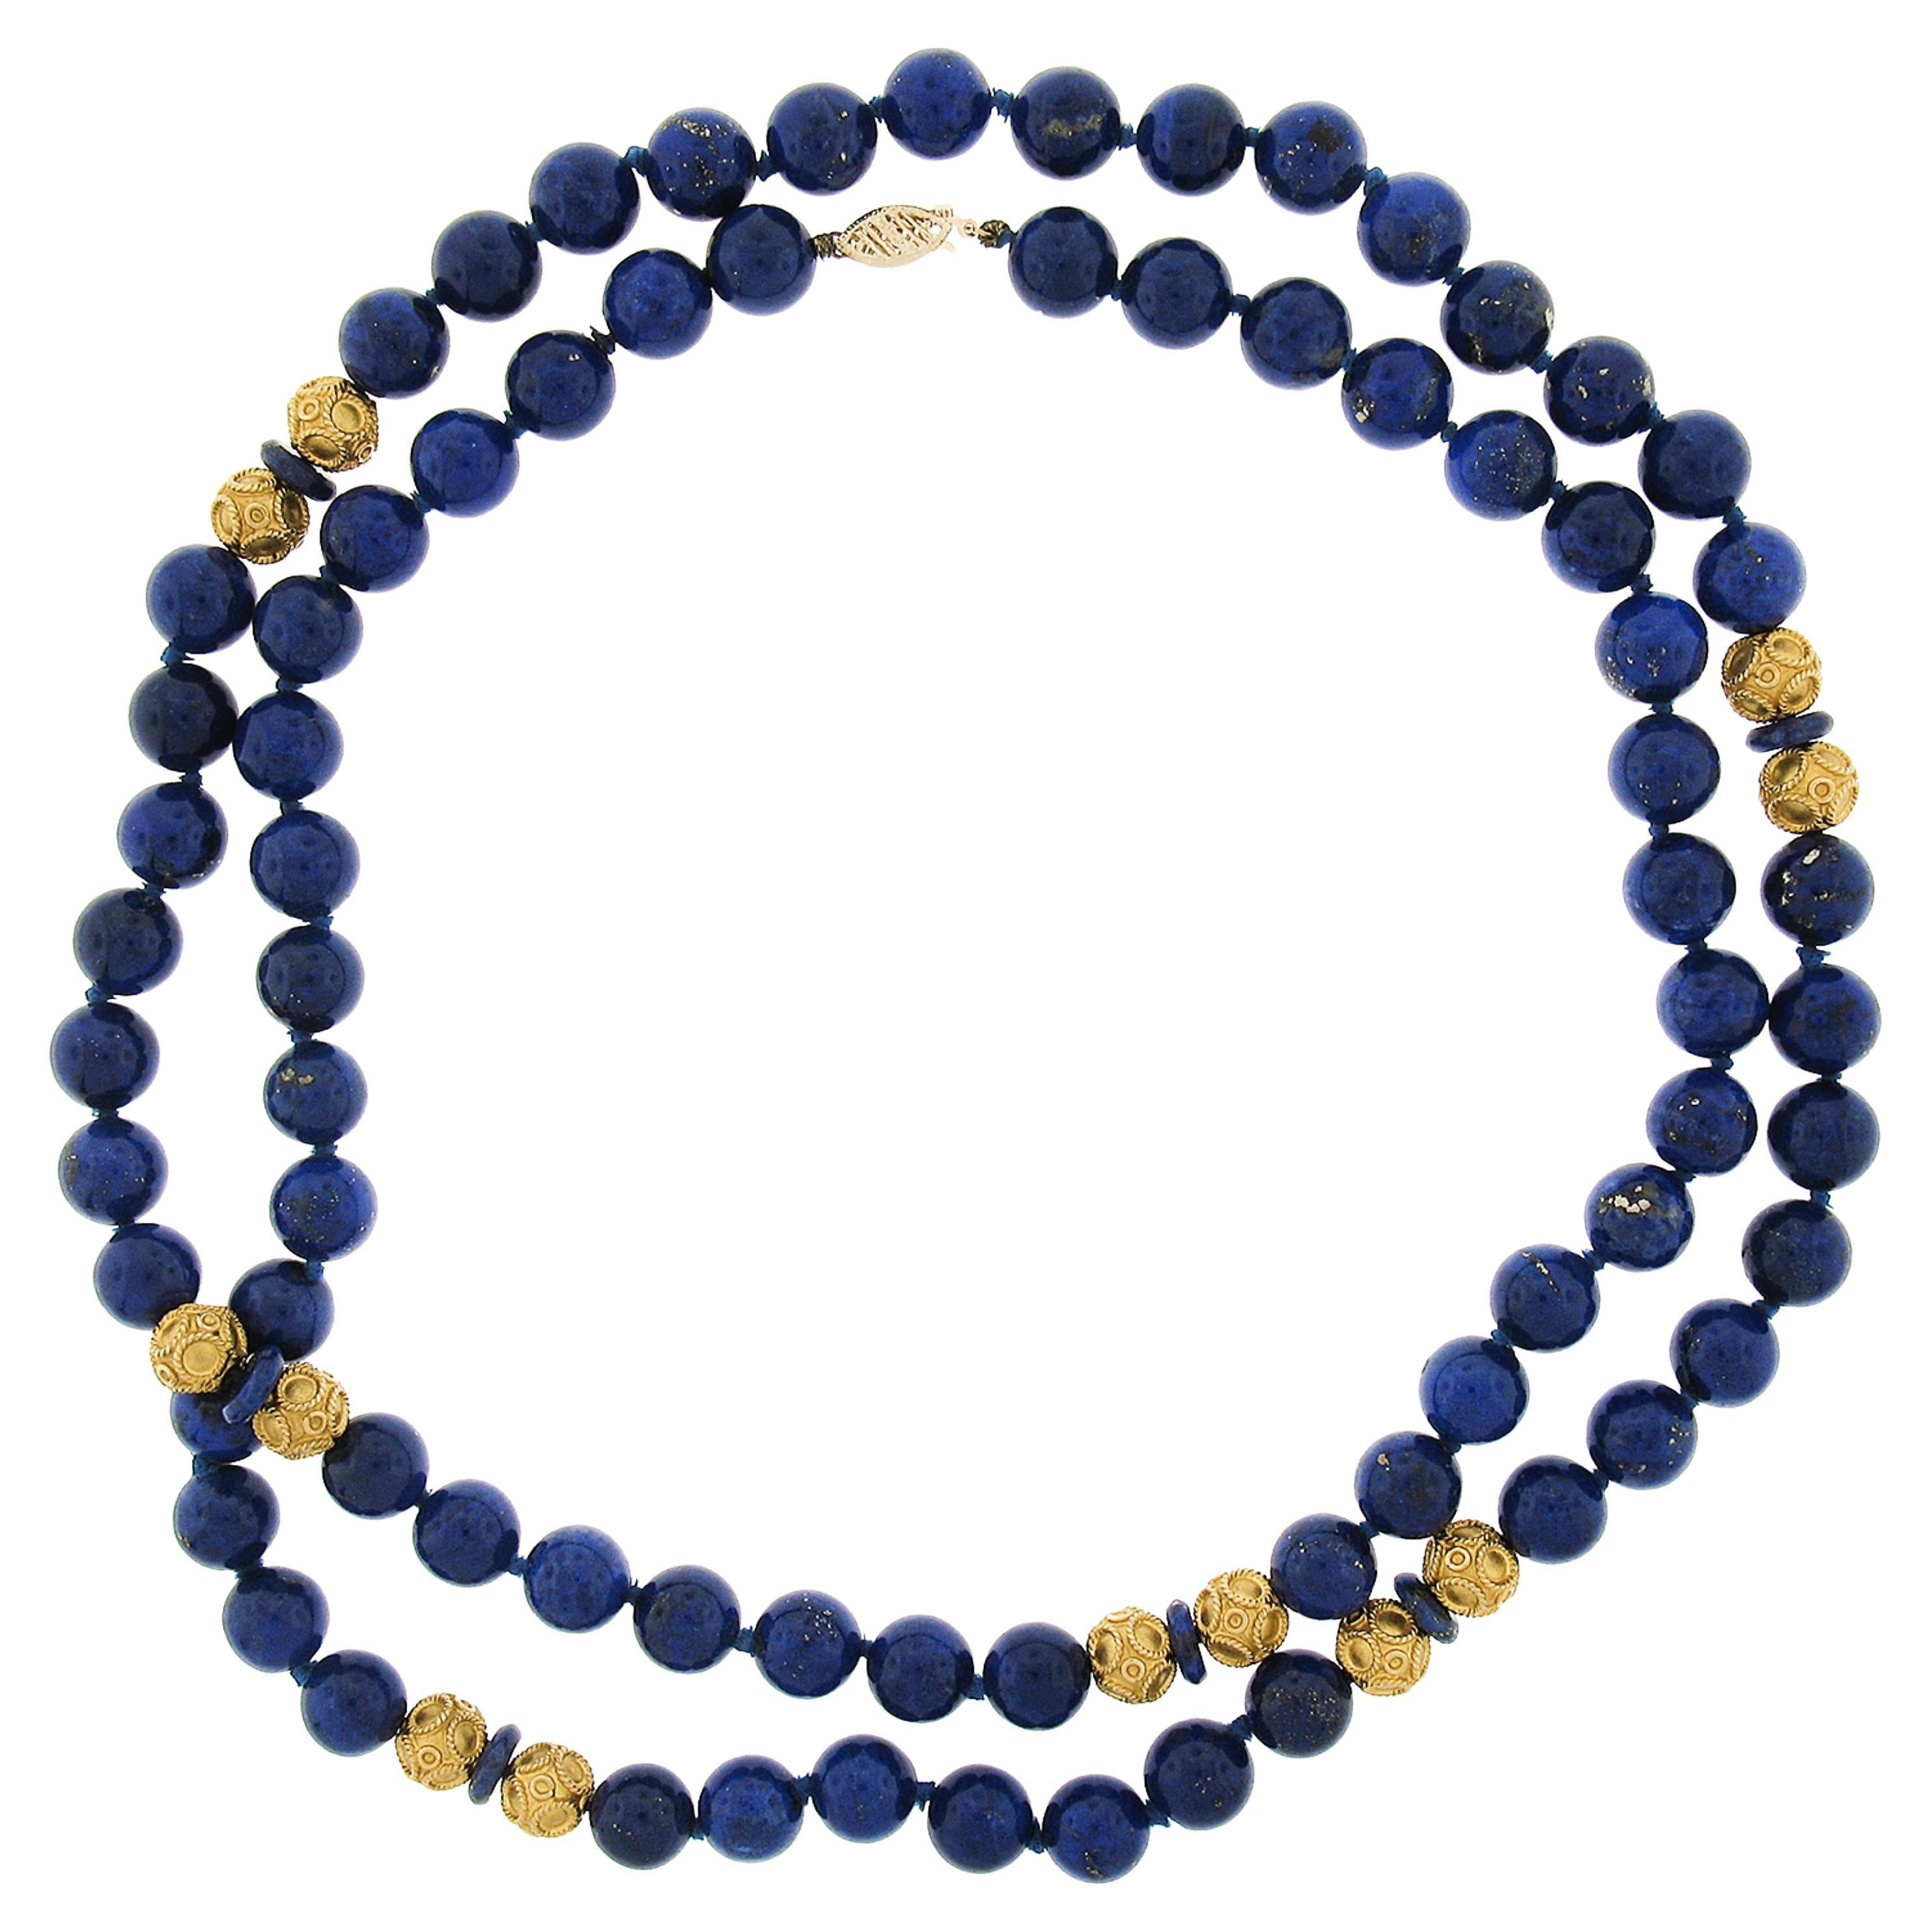 37" Long GIA Round Blue Lapis Bead Strand Necklace & 18k Gold Wire Ball Spacers